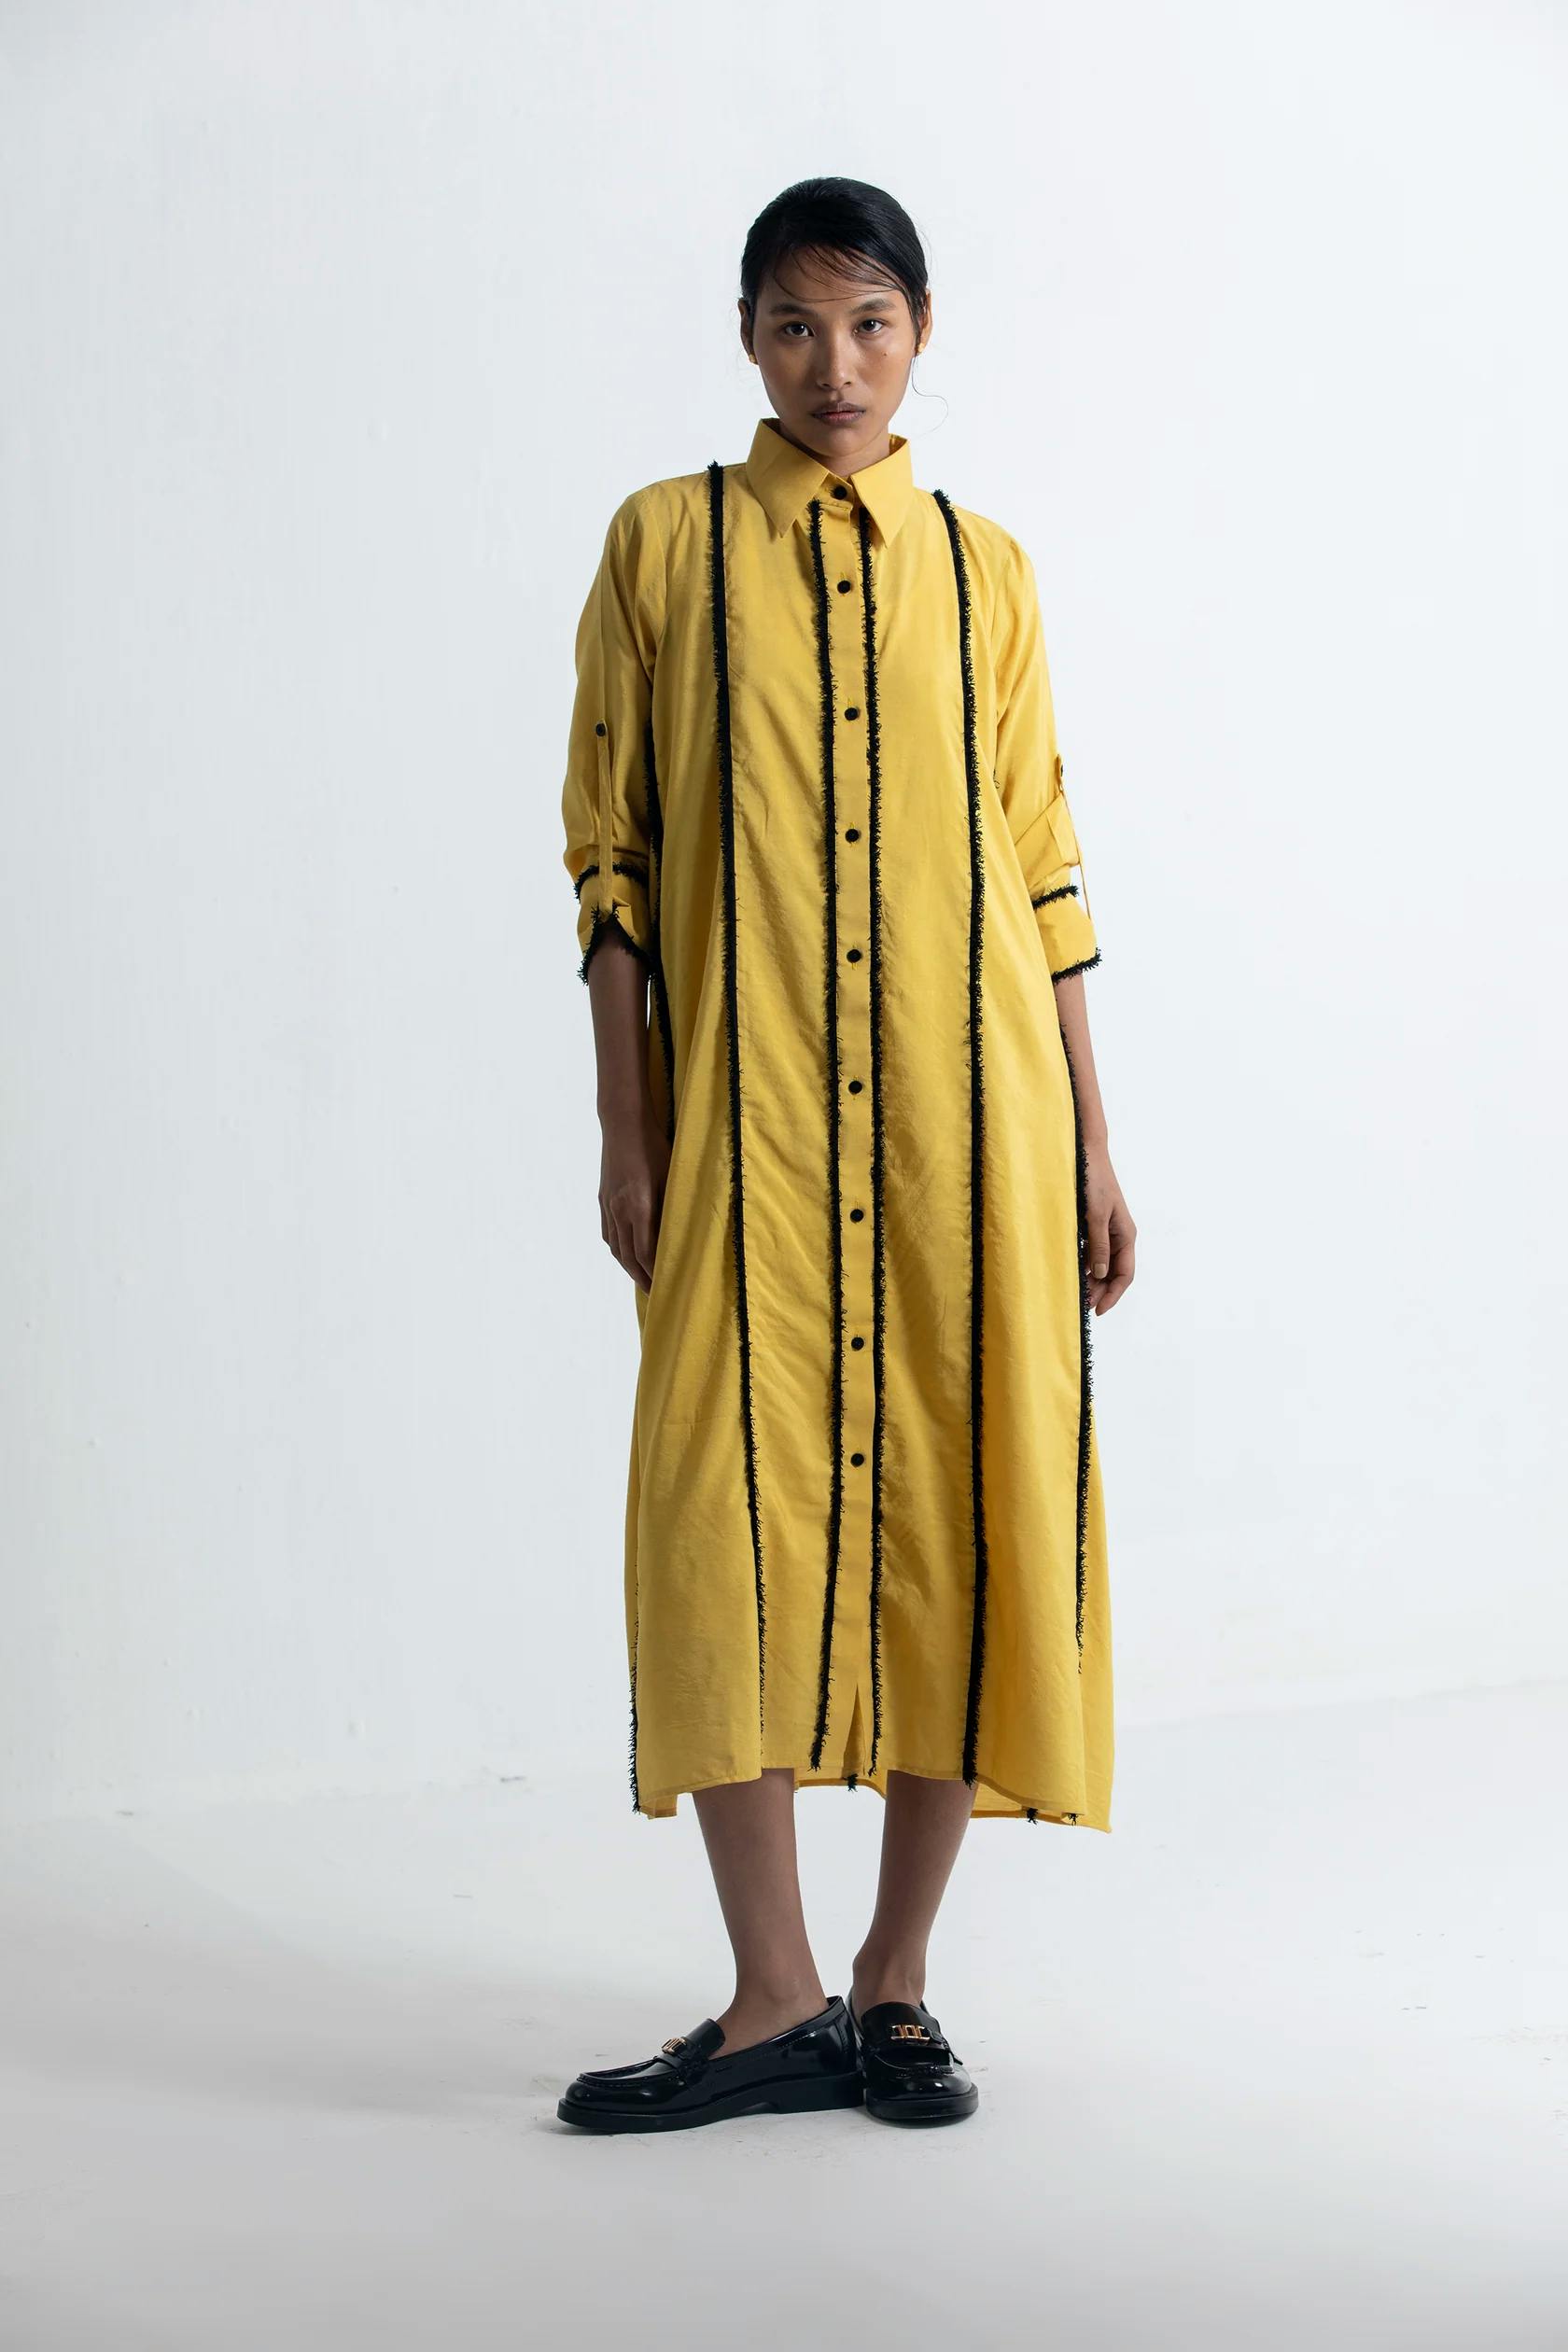 Brushed yellow dress, a product by Corpora Studio